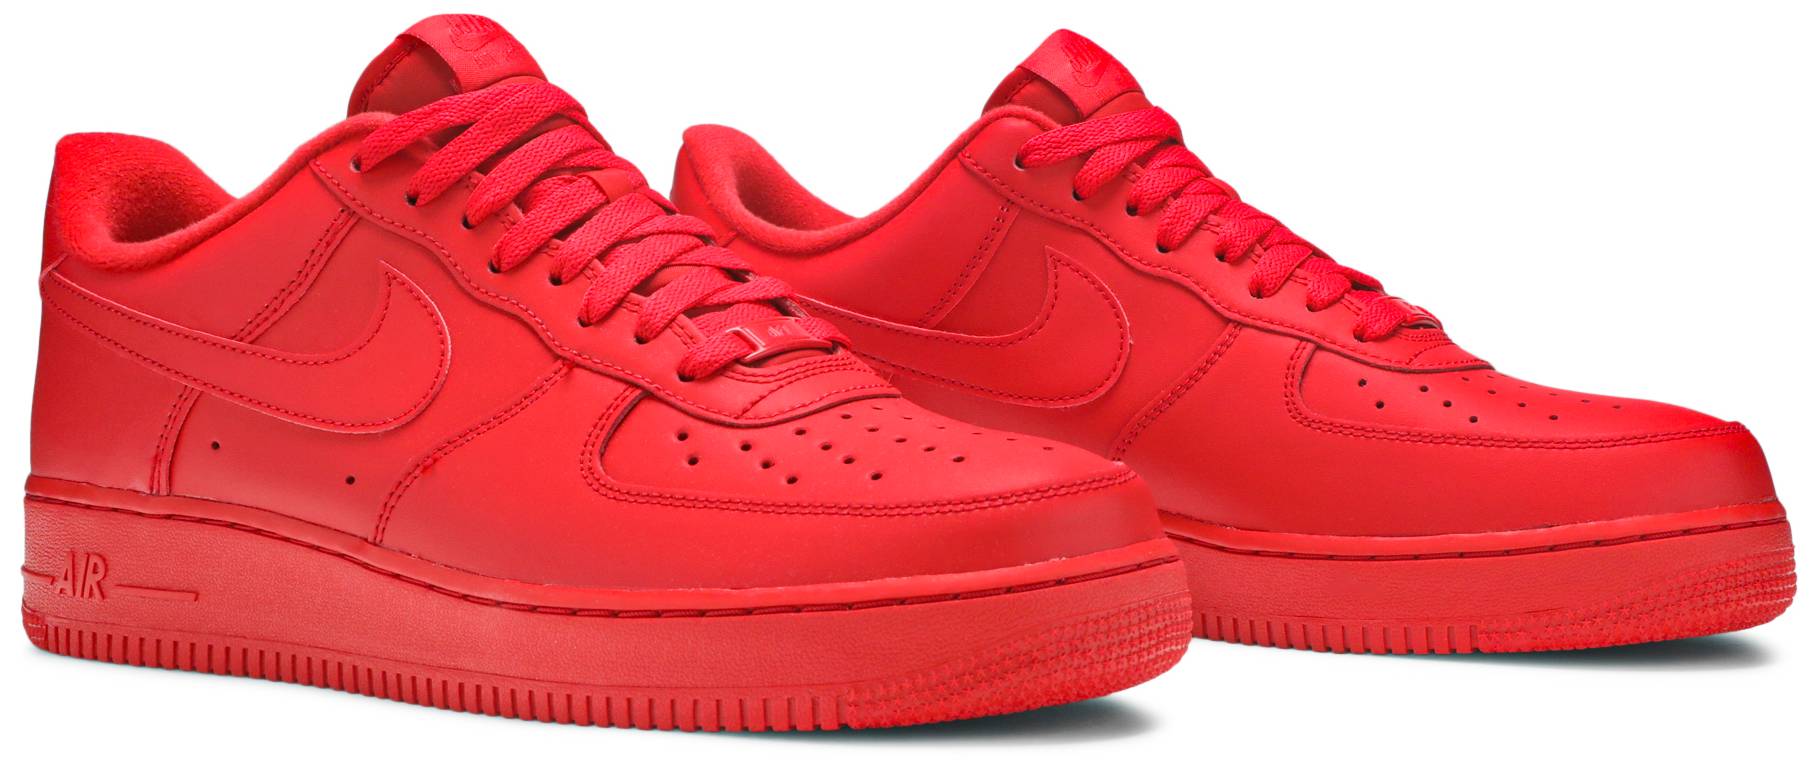 Air Force 1 Low '07 LV8 1 'Triple Red' - Nike - CW6999 600 | GOAT